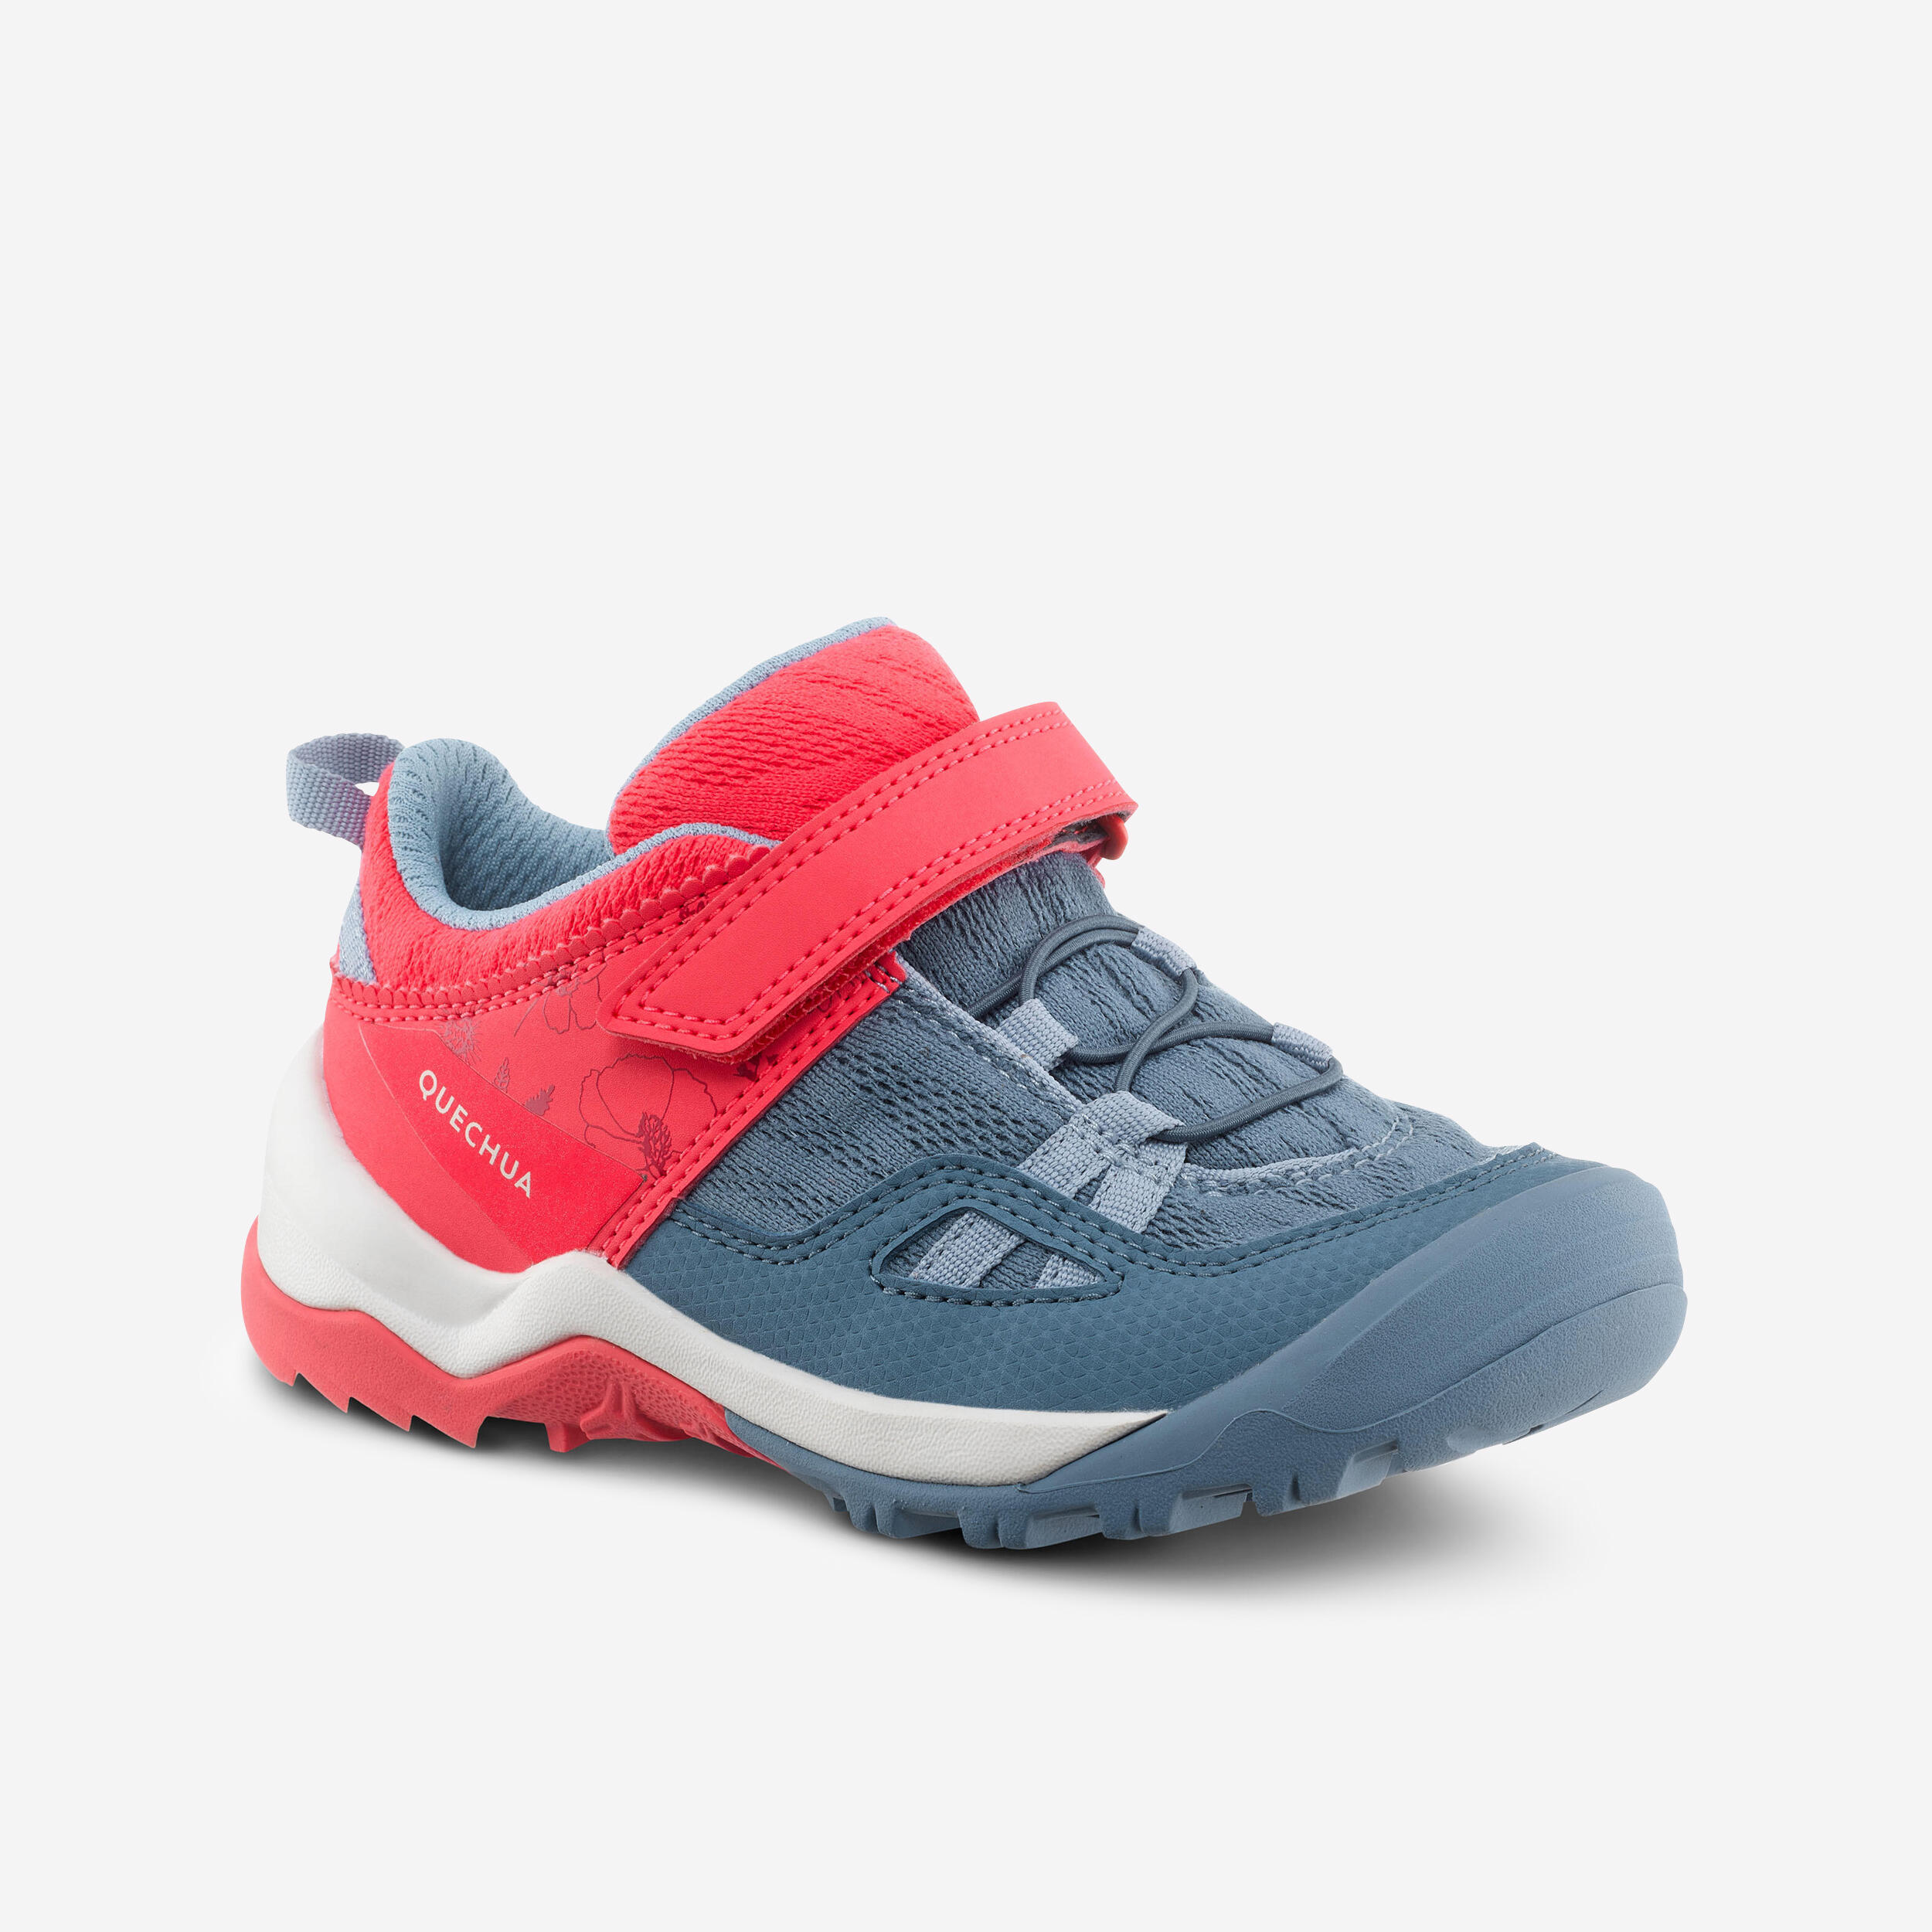 Image of Kids’ Hiking Shoes - Crossrock